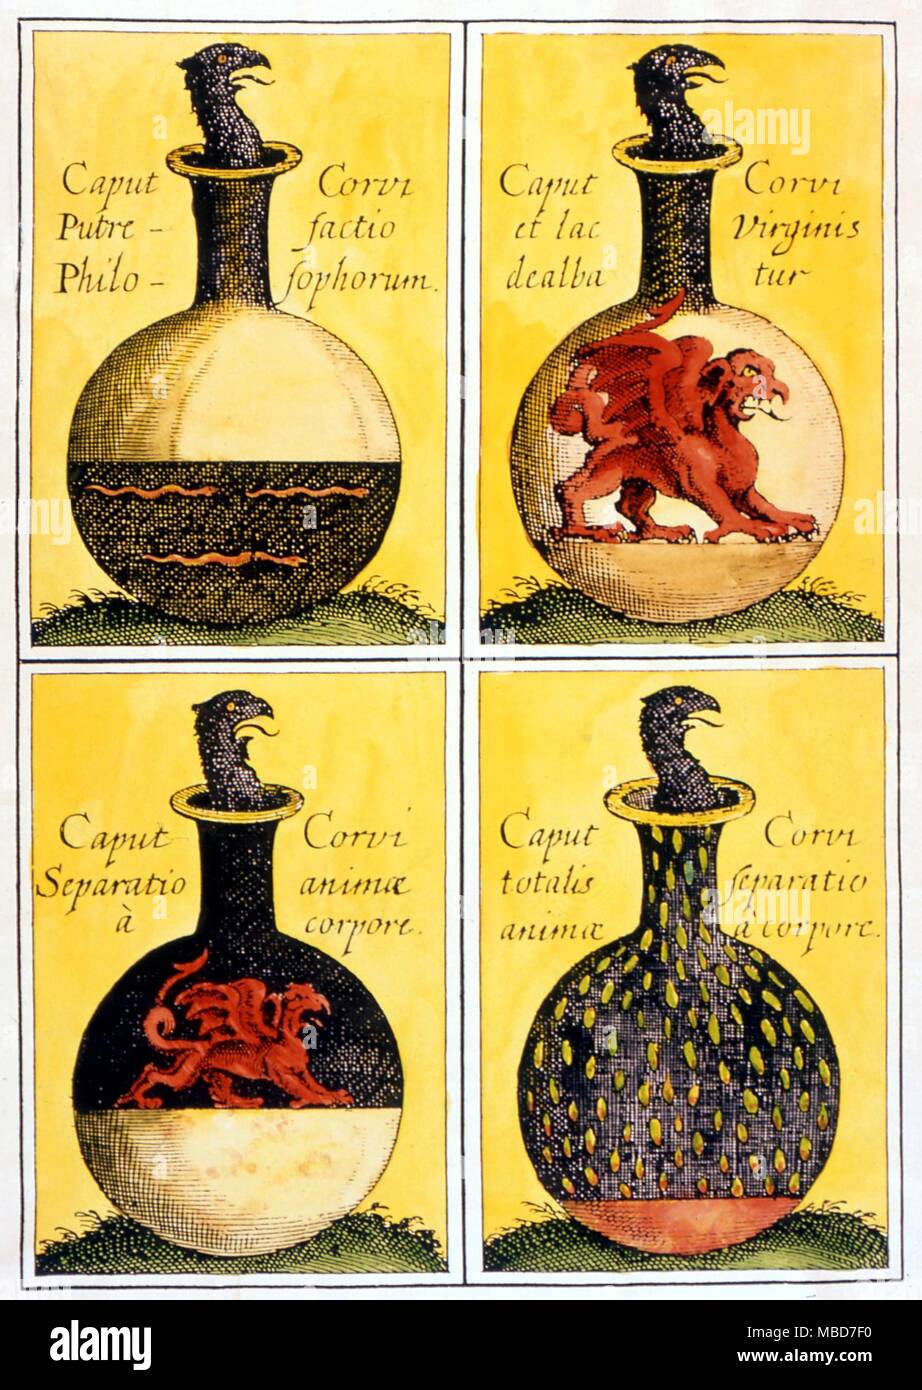 Alchemy - Head of the Crow - Four symbolical alchemical plates describing the processes in the production of the stone. The head of the Crow and the Red Lion. From 'Anatomia Auri' by J. D. Mylius, 1628 Stock Photo